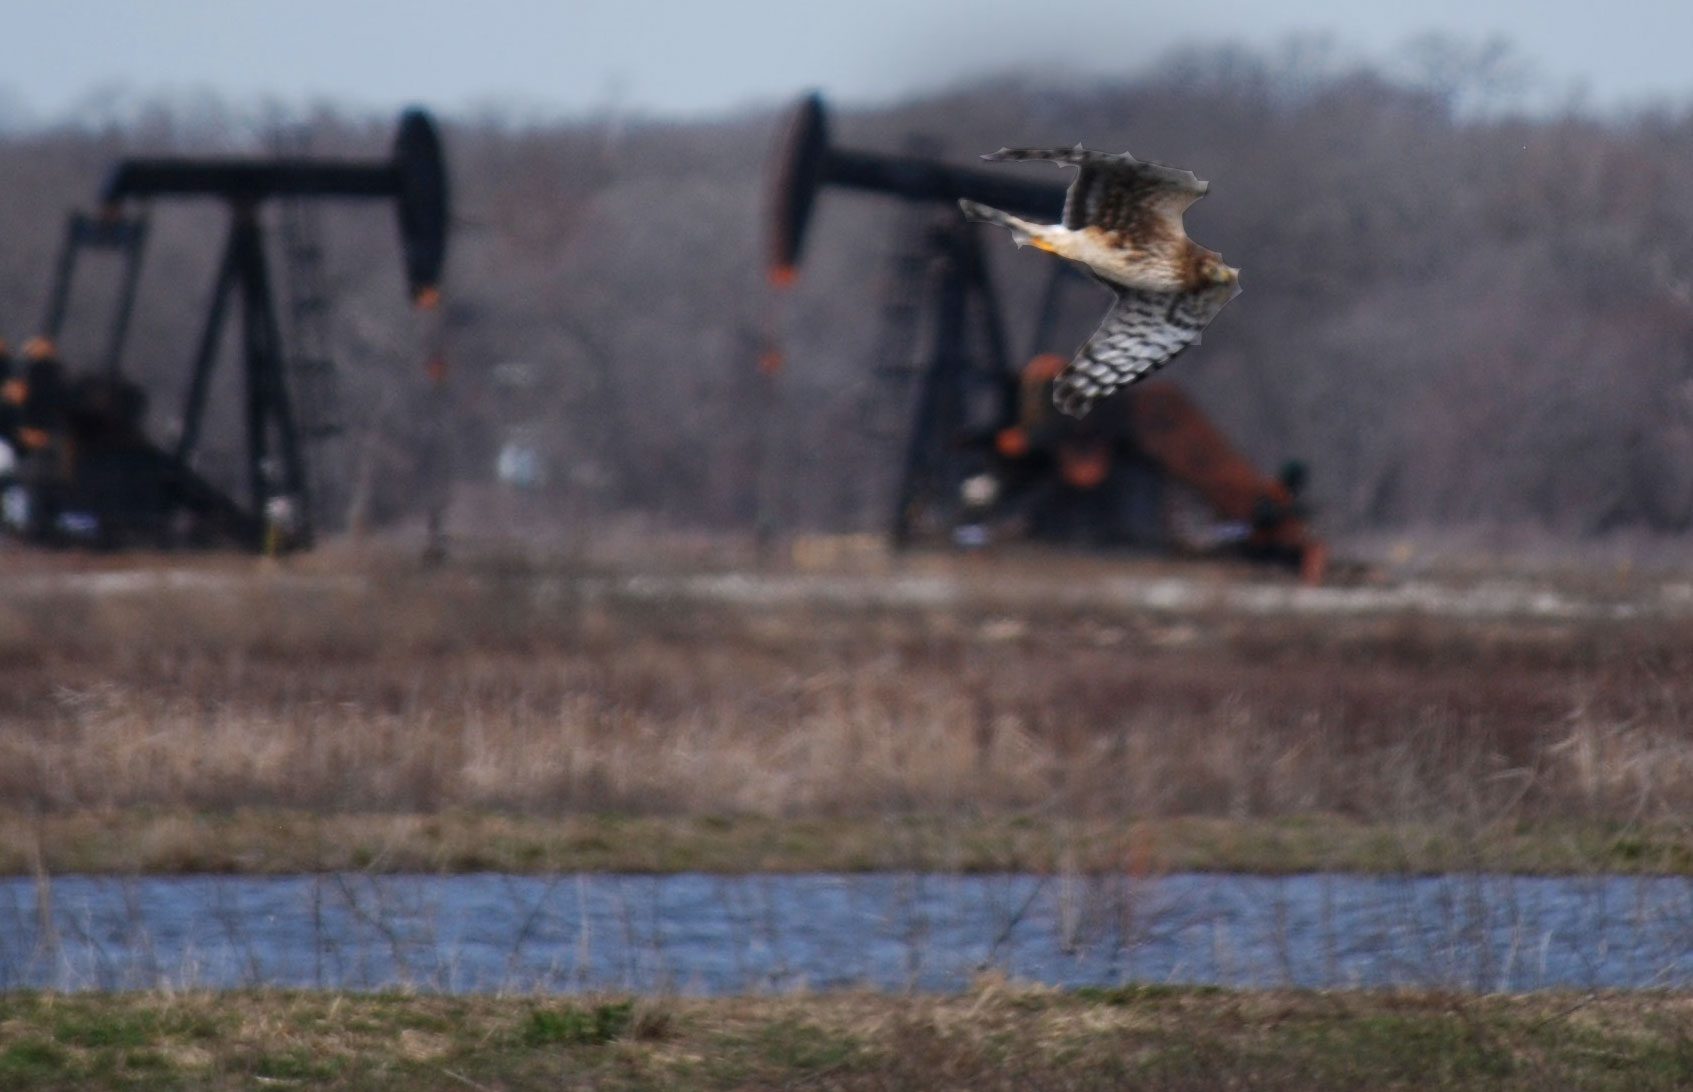 A Northern Harrier at the Hagerman NWR in TX. Photo by Sunshine Girl via Birdshare.